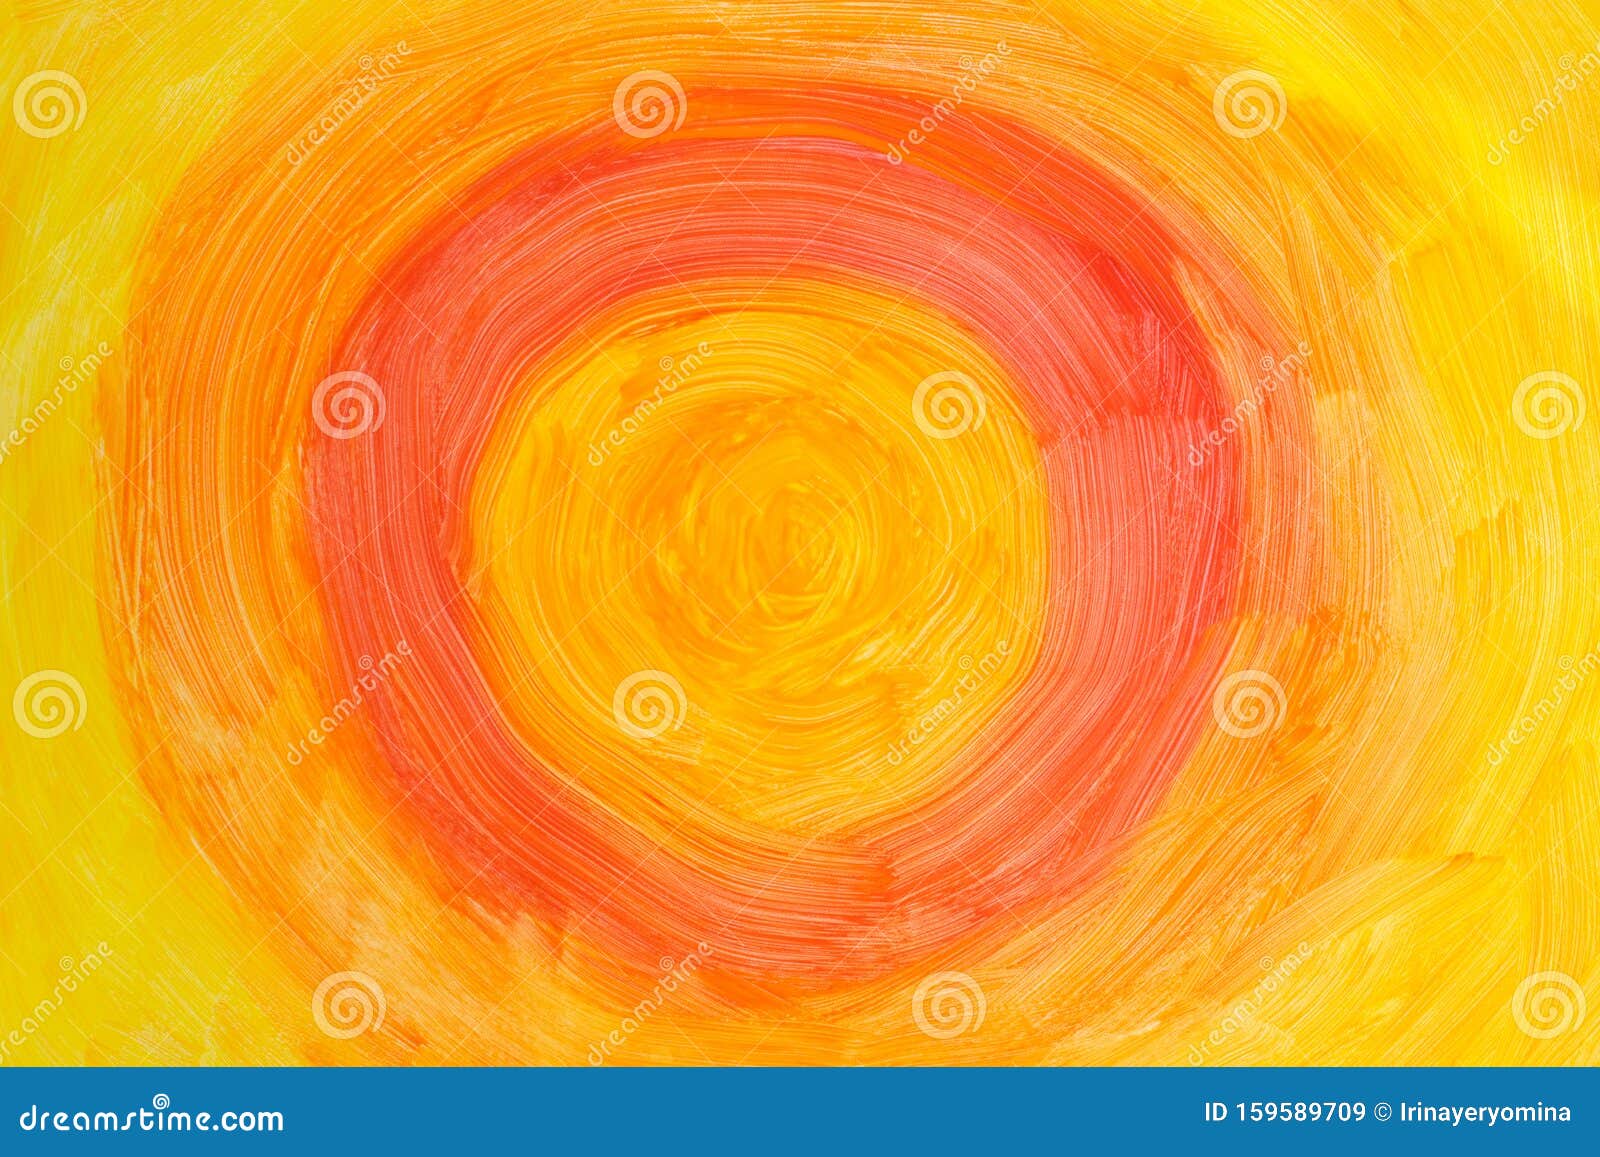 Action Painting. Abstract Hand-painted Yellow and Orange Art Background  Stock Image - Image of canvas, graphic: 159589709